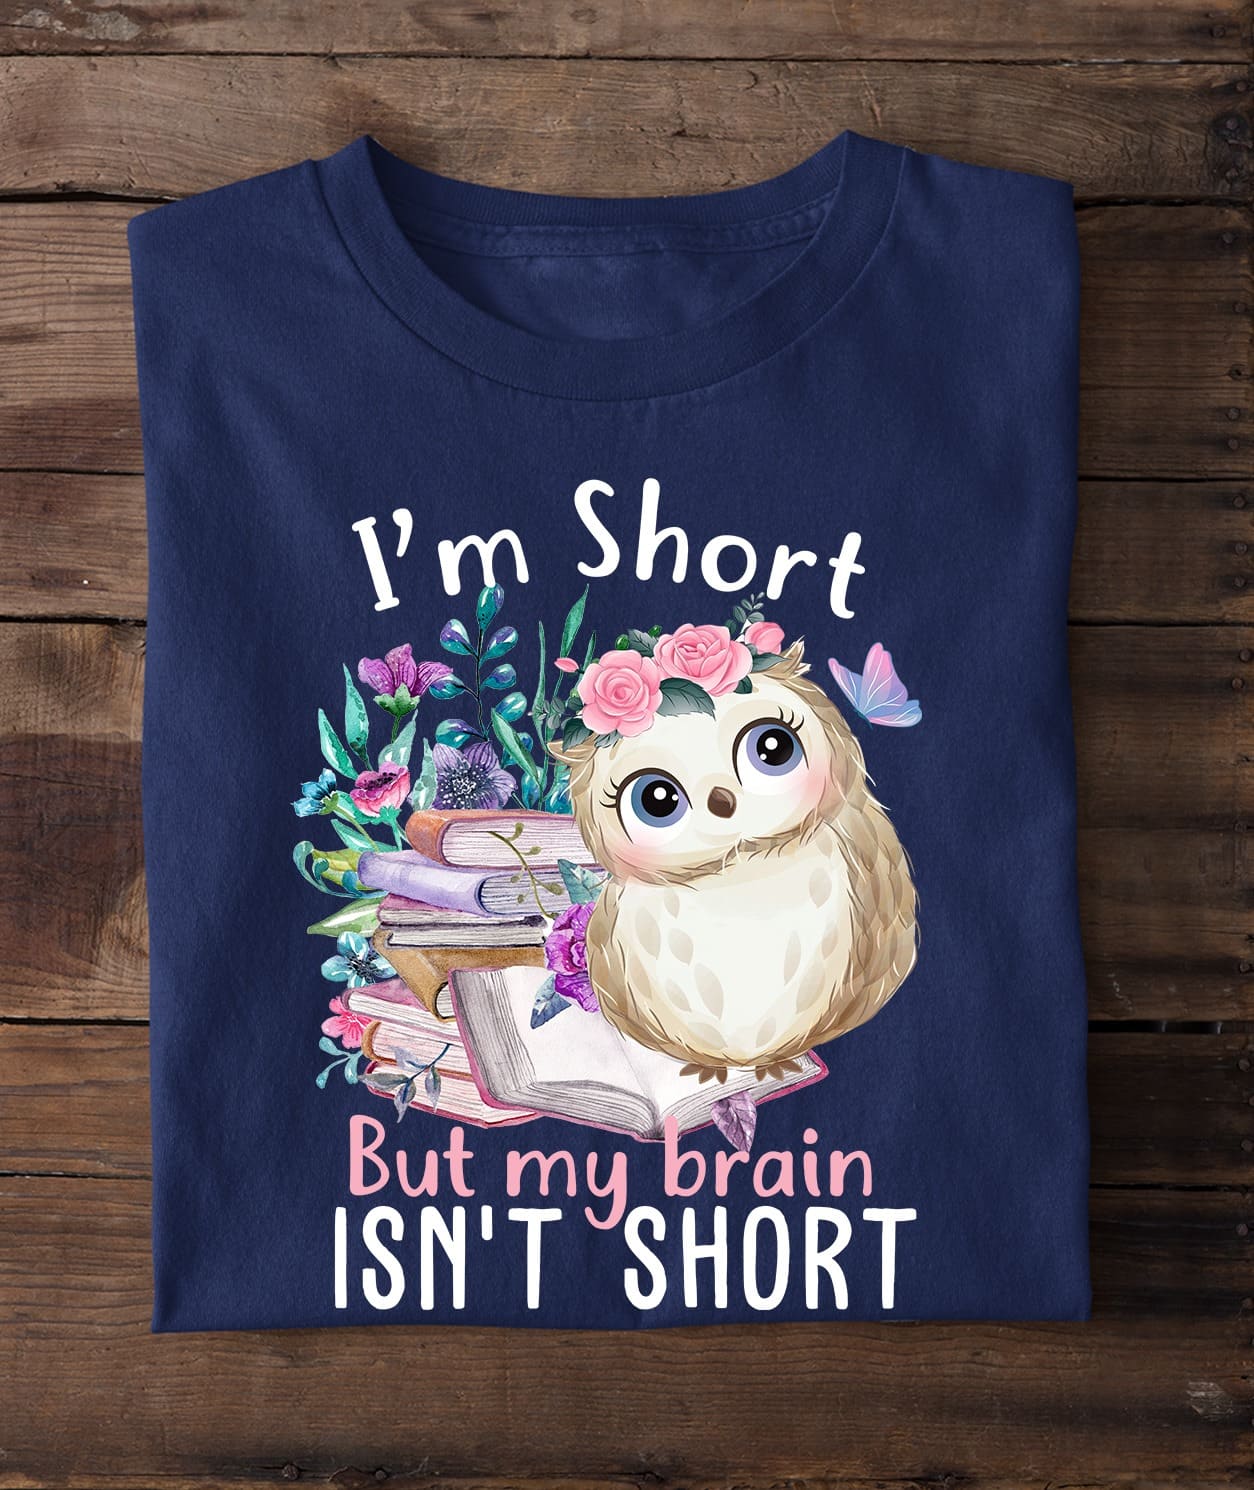 I'm short but my brain isn't short - Owl and book, gorgeous owl graphic T-shirt, book good for brain This T-Shirt, Hoodie, Sweatshirt, Ladies T-Shirt, Youth T-shirt is for lovers like Owl and book, gorgeous owl graphic T-shirt, book good for brain  Shirt are much suitable for those who Love Hobbies, Holidays, Pets, Movies, Out Door, Sport.